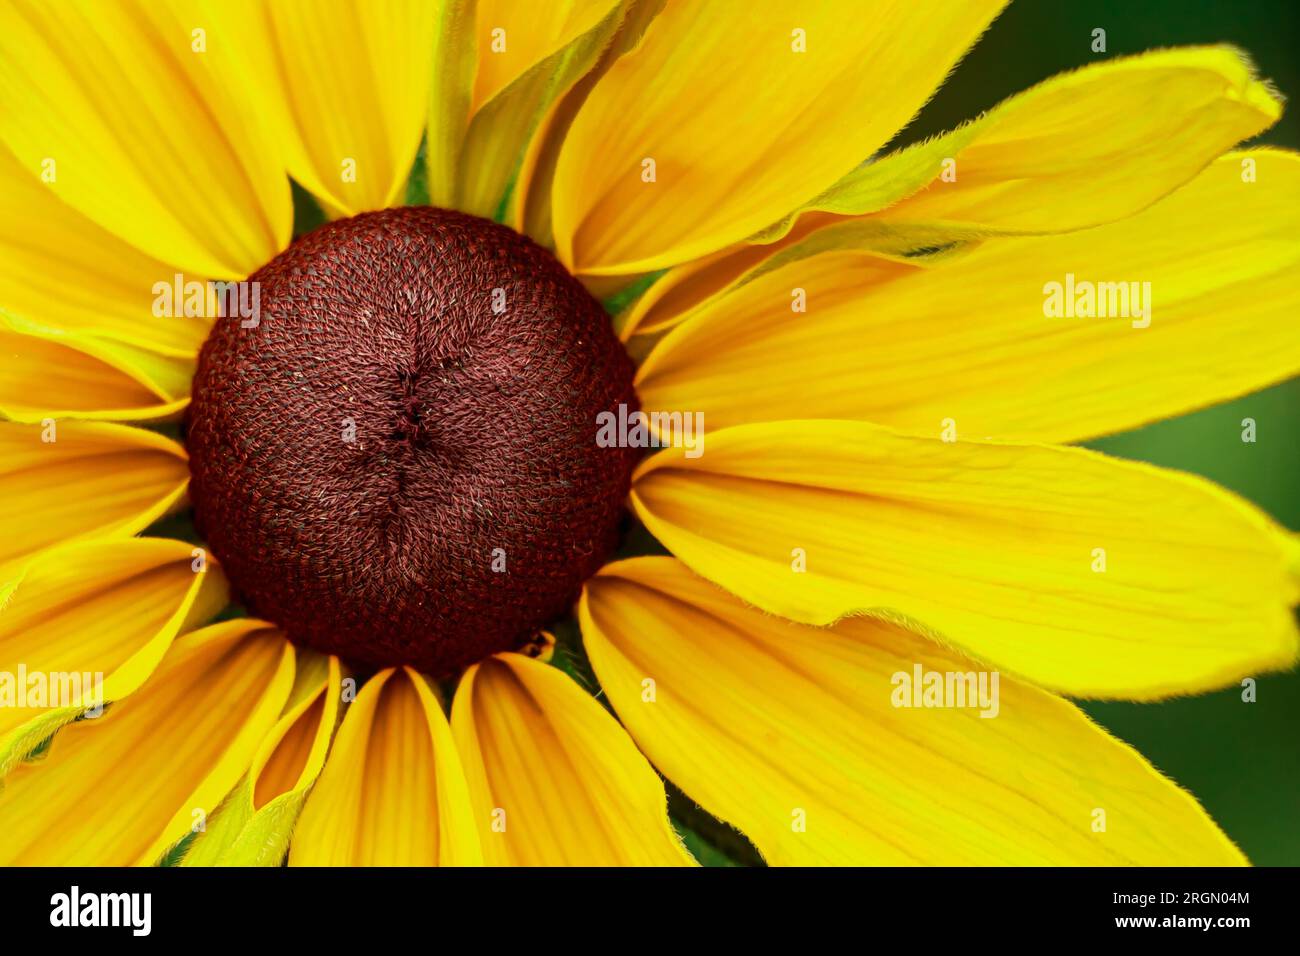 Yellow flower rudbeckia goldsturm close-up. Growing medicinal plants in garden. Summer natural background. Stock Photo